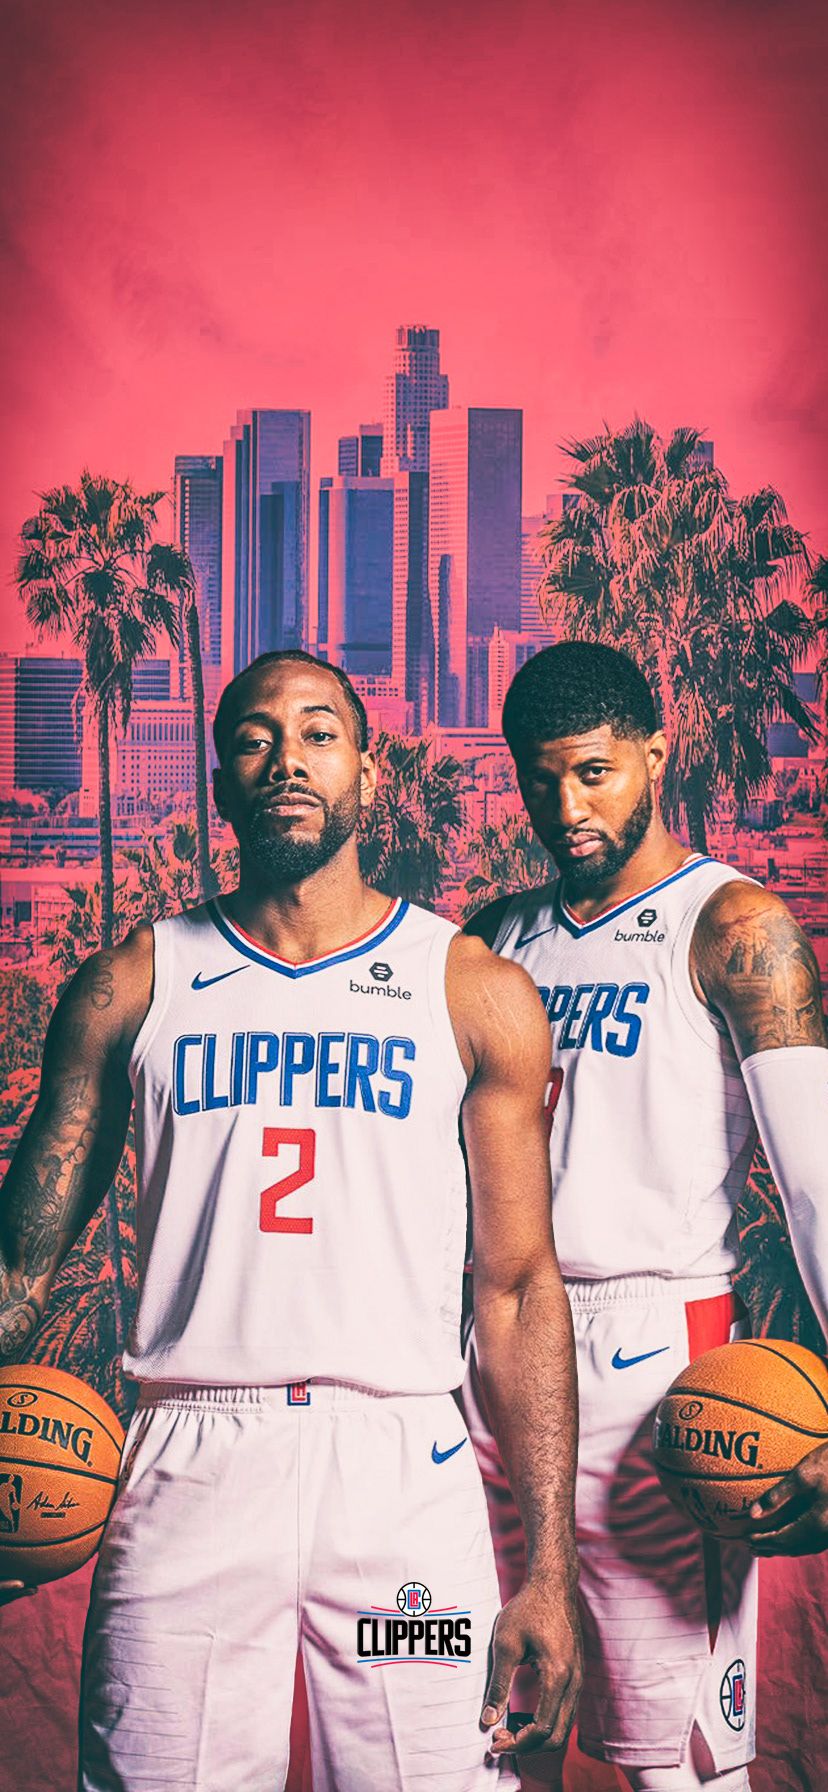 CLIPPERS WALLPAPER:: DOWNLOAD on Behance